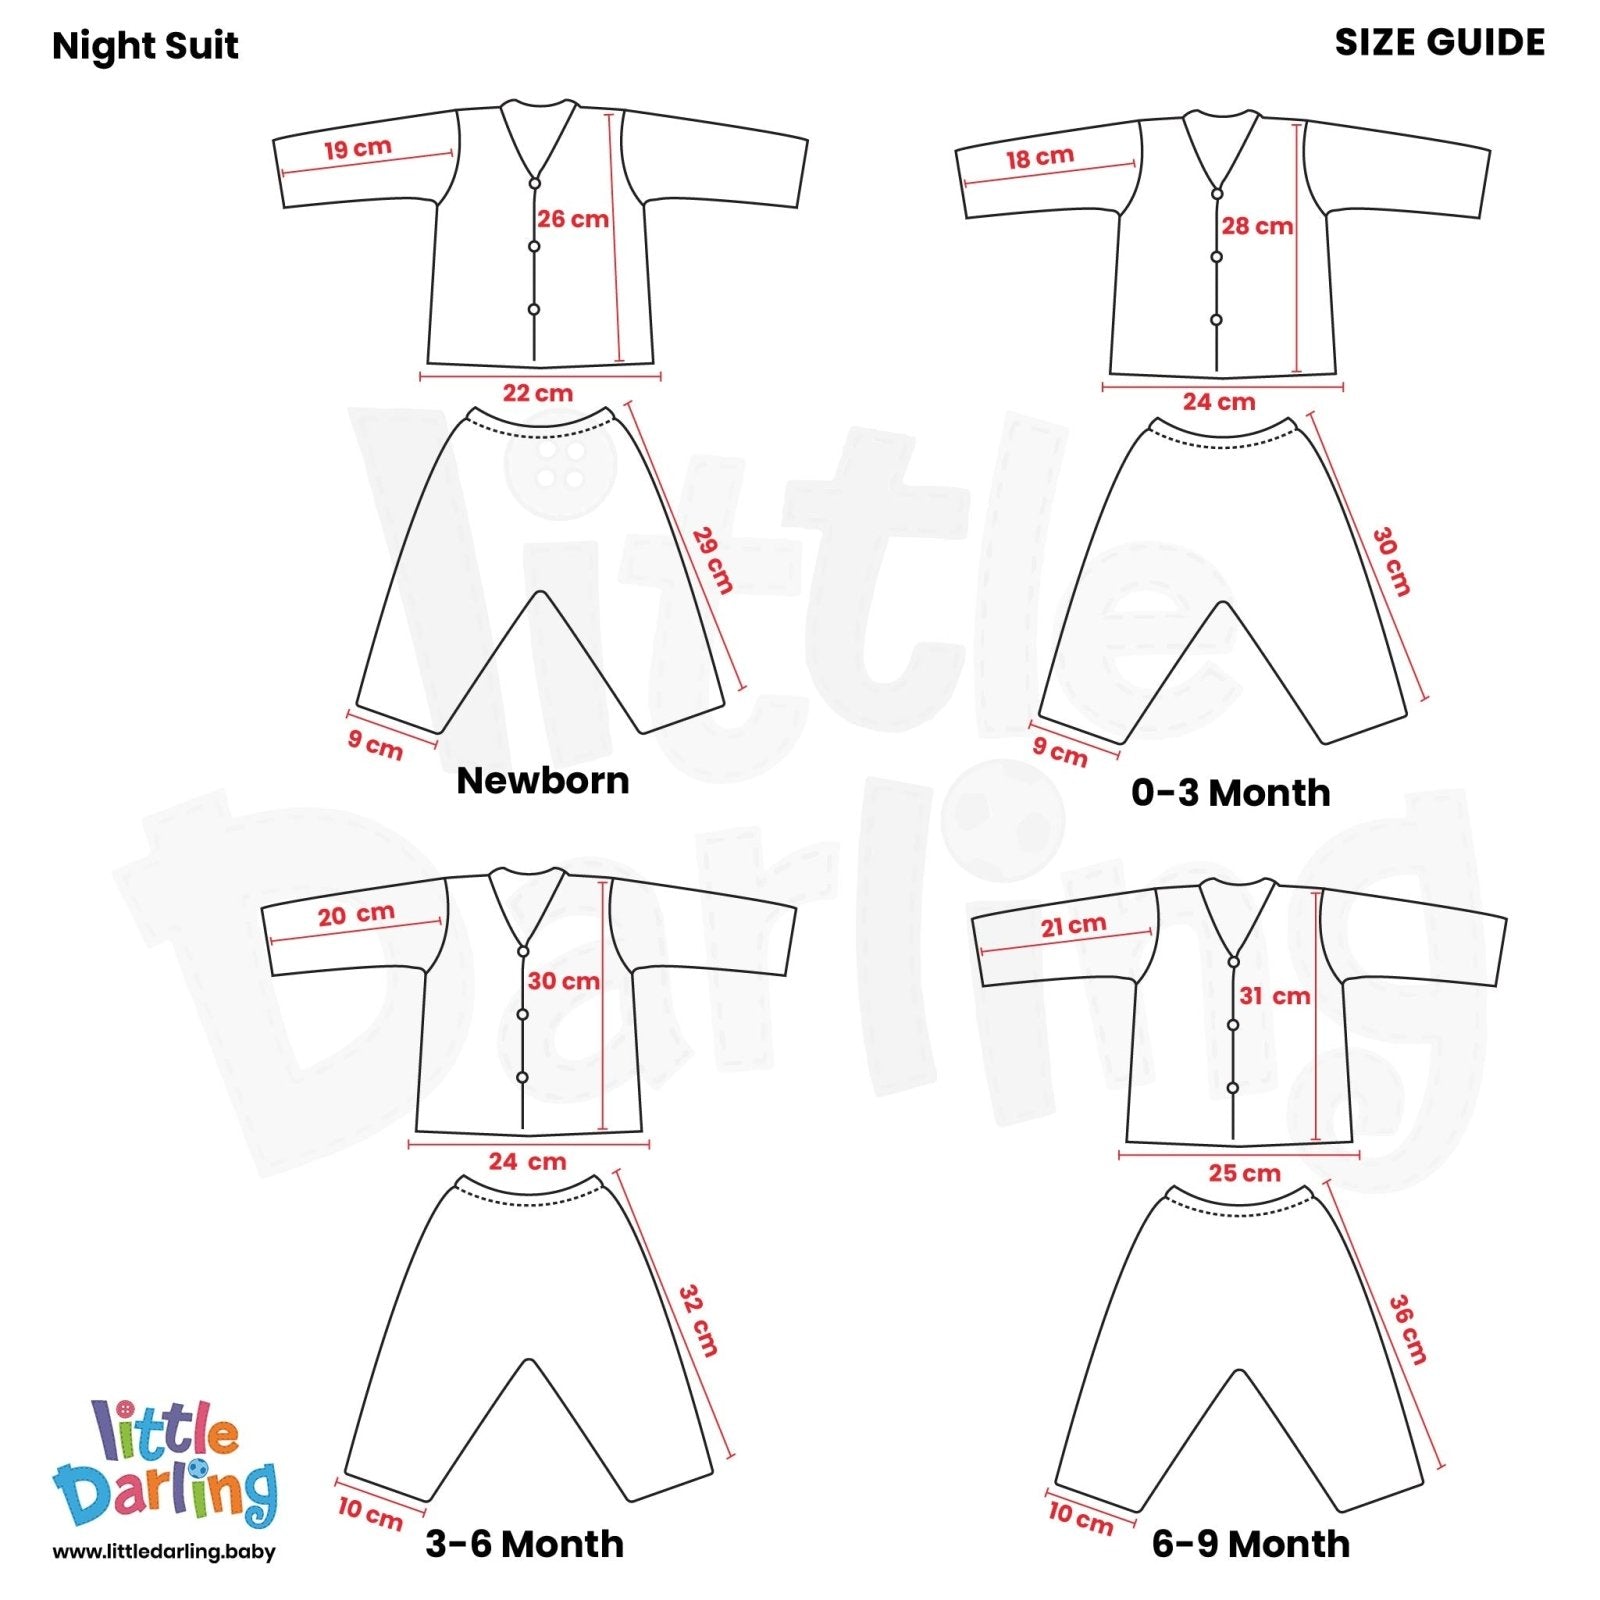 Baby Night Suit Triangle Print by Little Darling